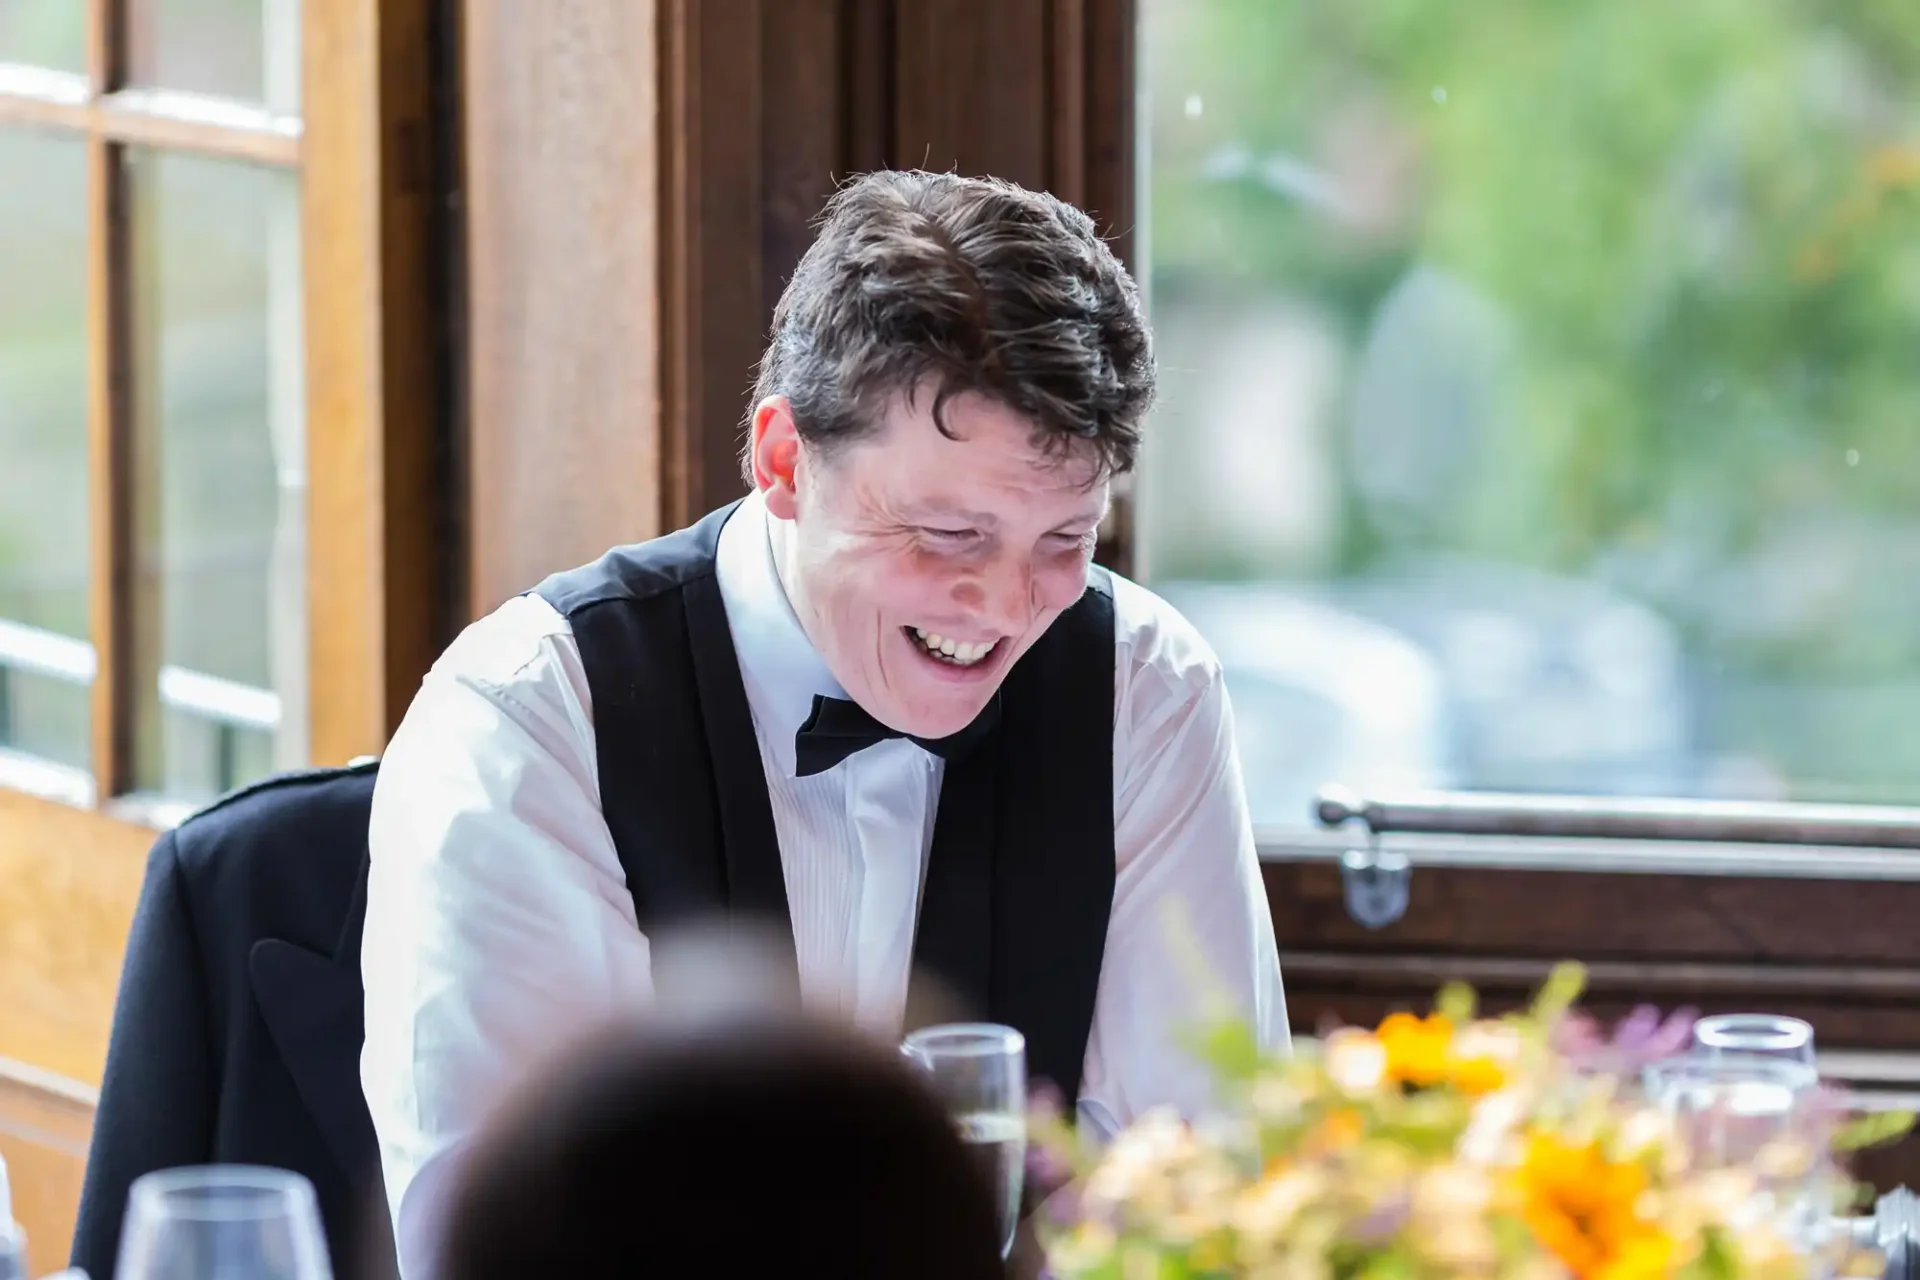 A man in a tuxedo laughing joyfully at a table with a floral centerpiece, natural light streaming through a window beside him.